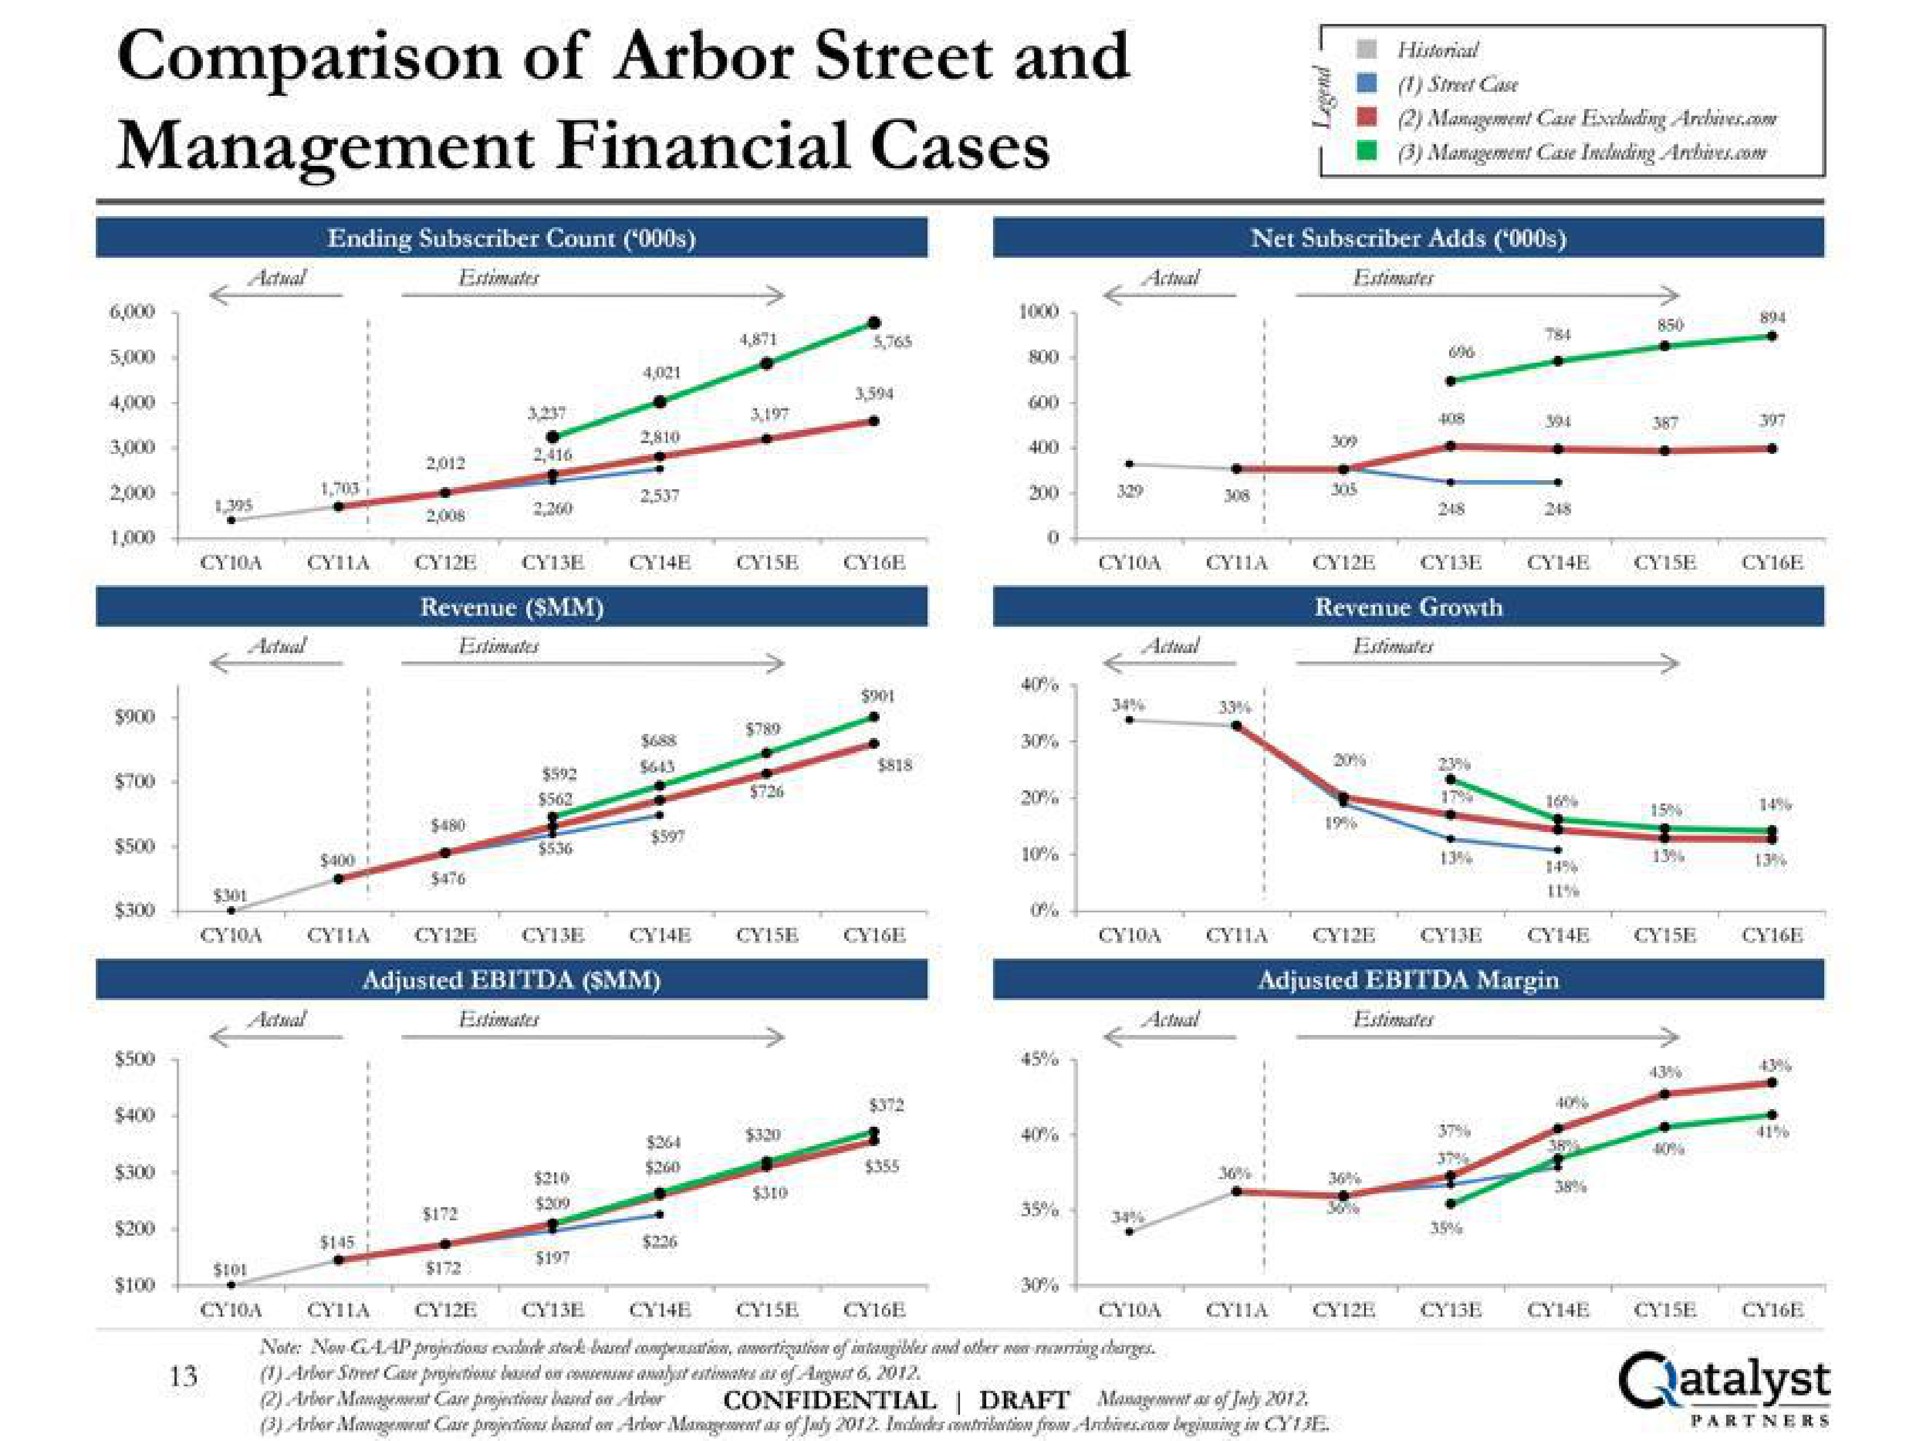 comparison of arbor street and management financial cases | Qatalyst Partners